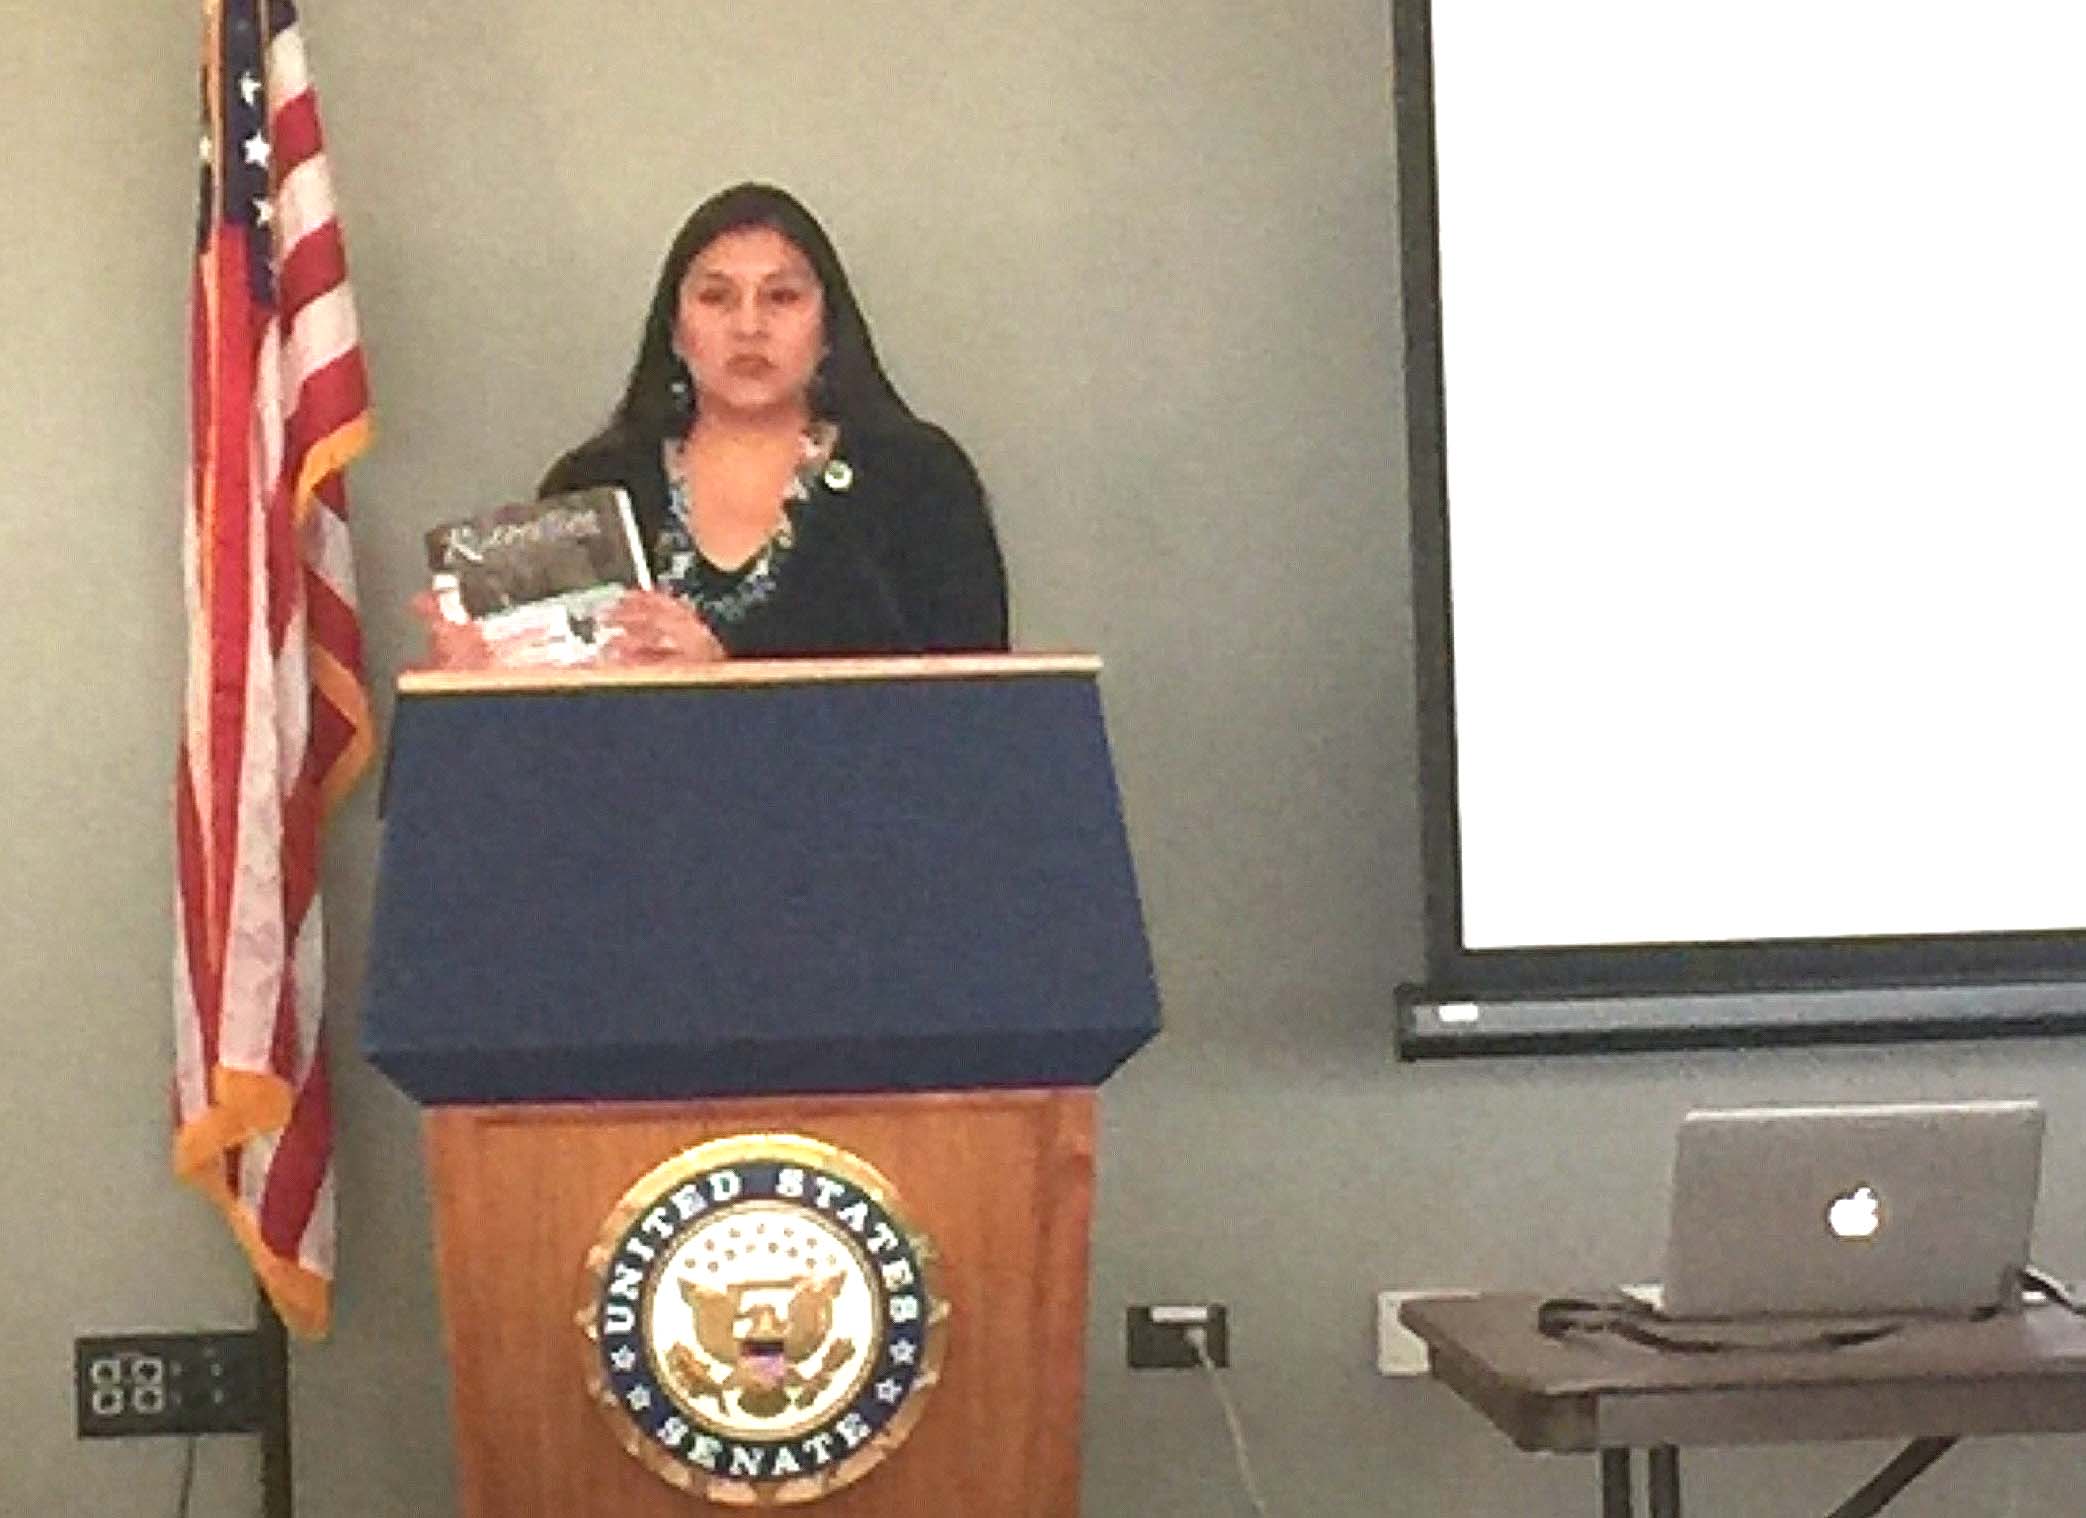 Cherrah Giles, Chairwoman, Board of Directors, National Indigenous Women's Resource Center, speaks at the briefing on Wednesday, February 15, 2017.